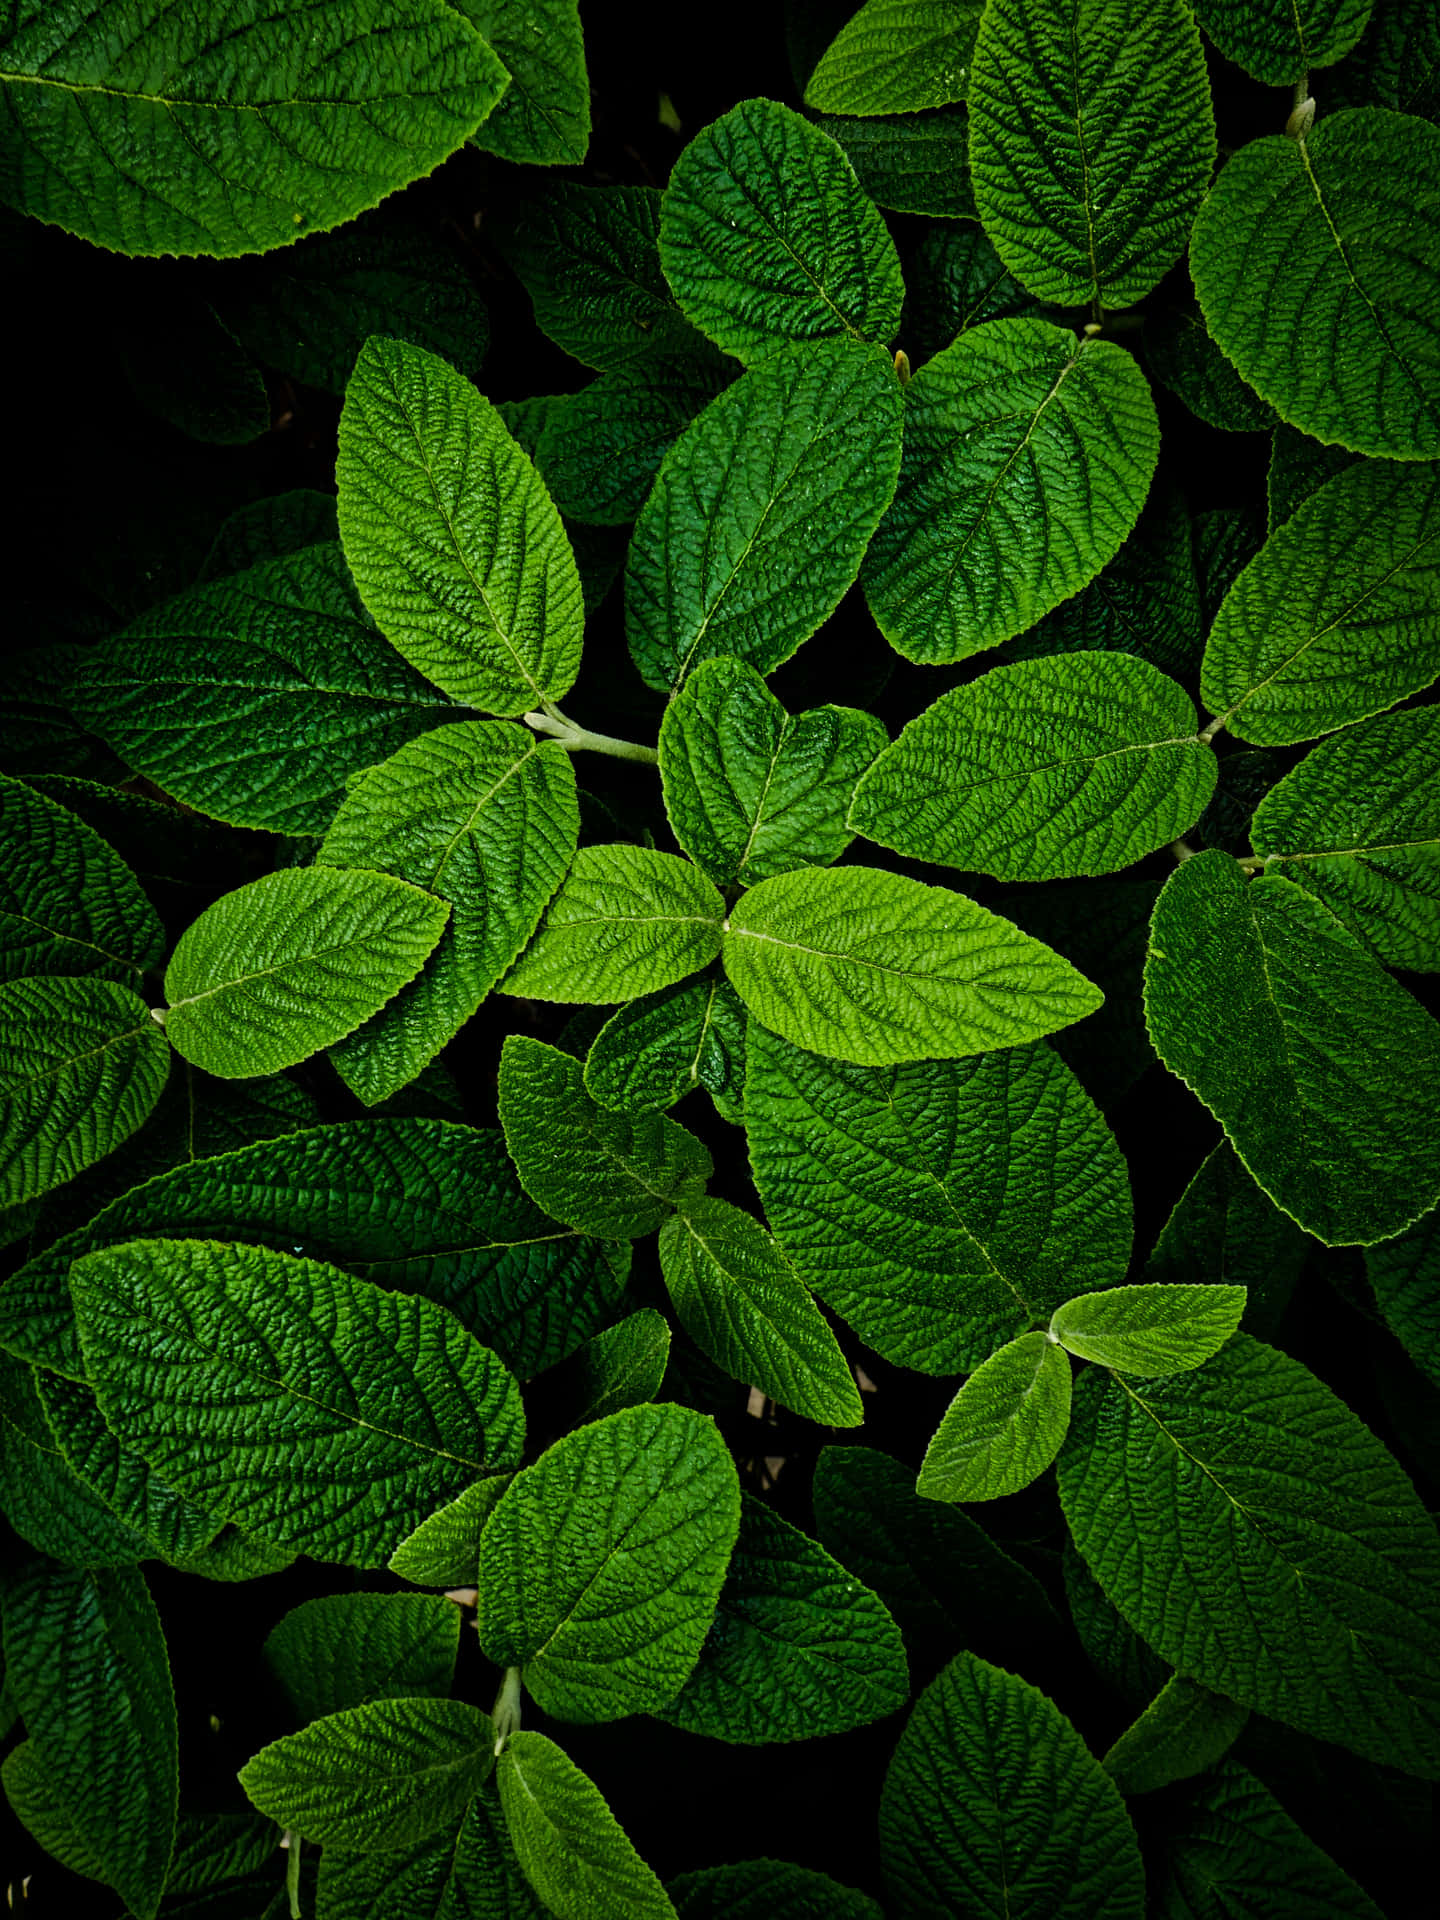 Green Leaves On A Dark Background